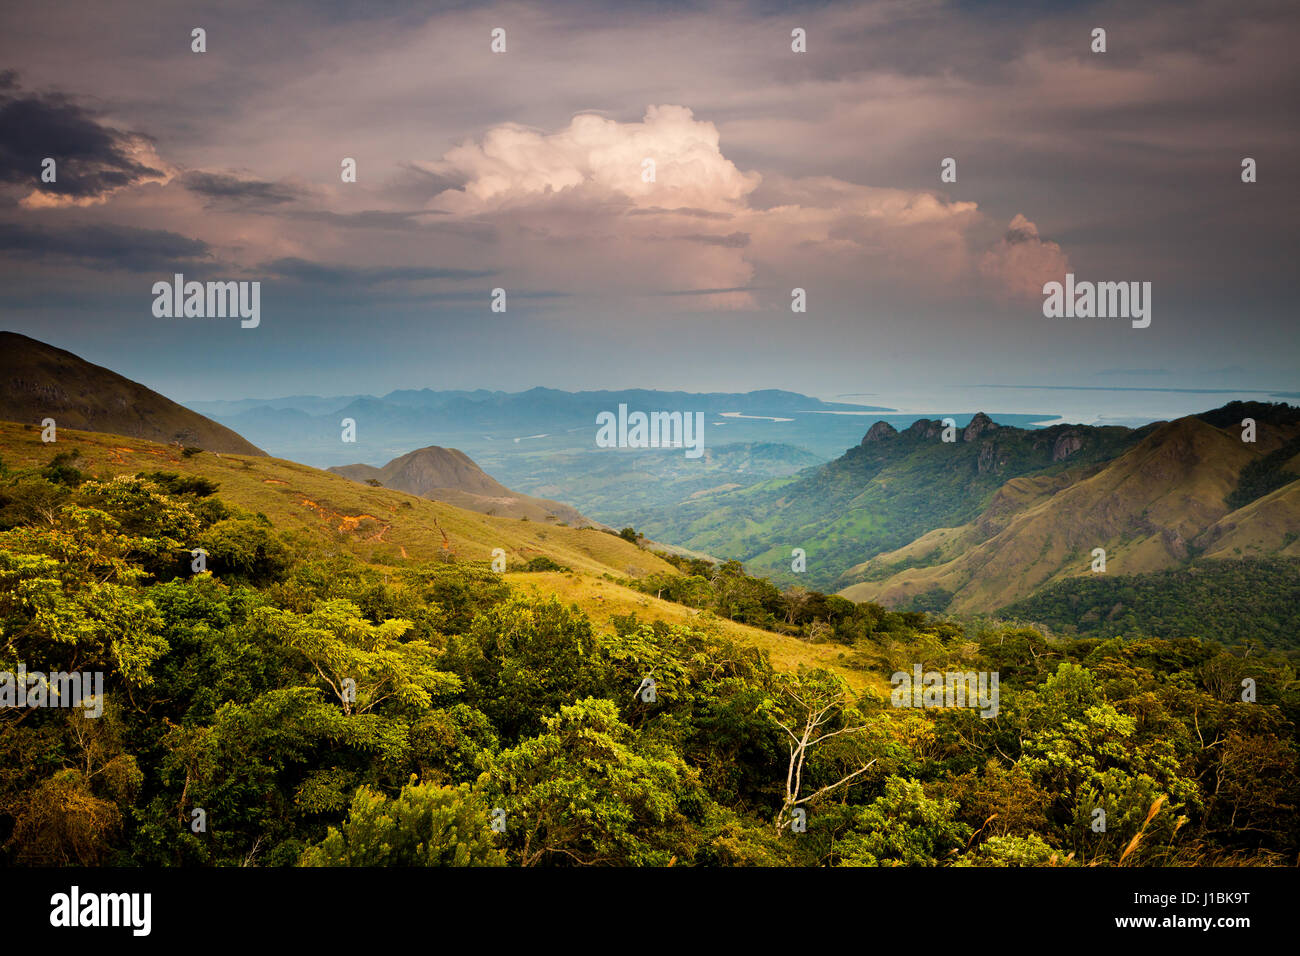 Panama landscape with evening light and thundercloud in the mountains of Altos de Campana National Park, Republic of Panama, Central America. Stock Photo